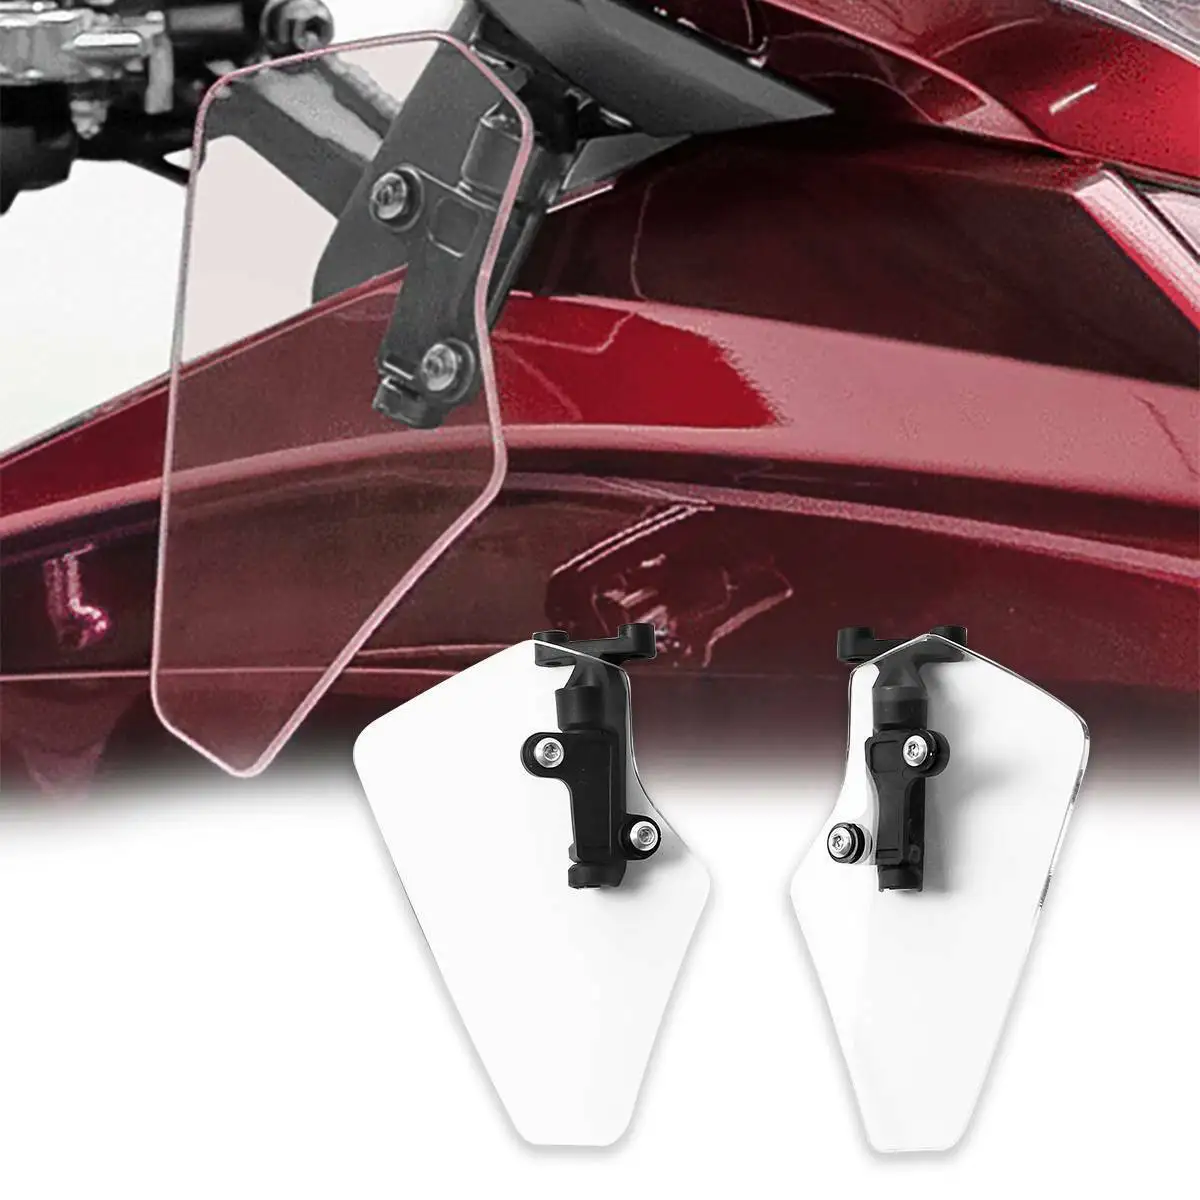 Green-L Clear Upper Air Wind Deflectors With Mounting Hardware Kit Fit For Honda Goldwing GL1800 2018-2021 